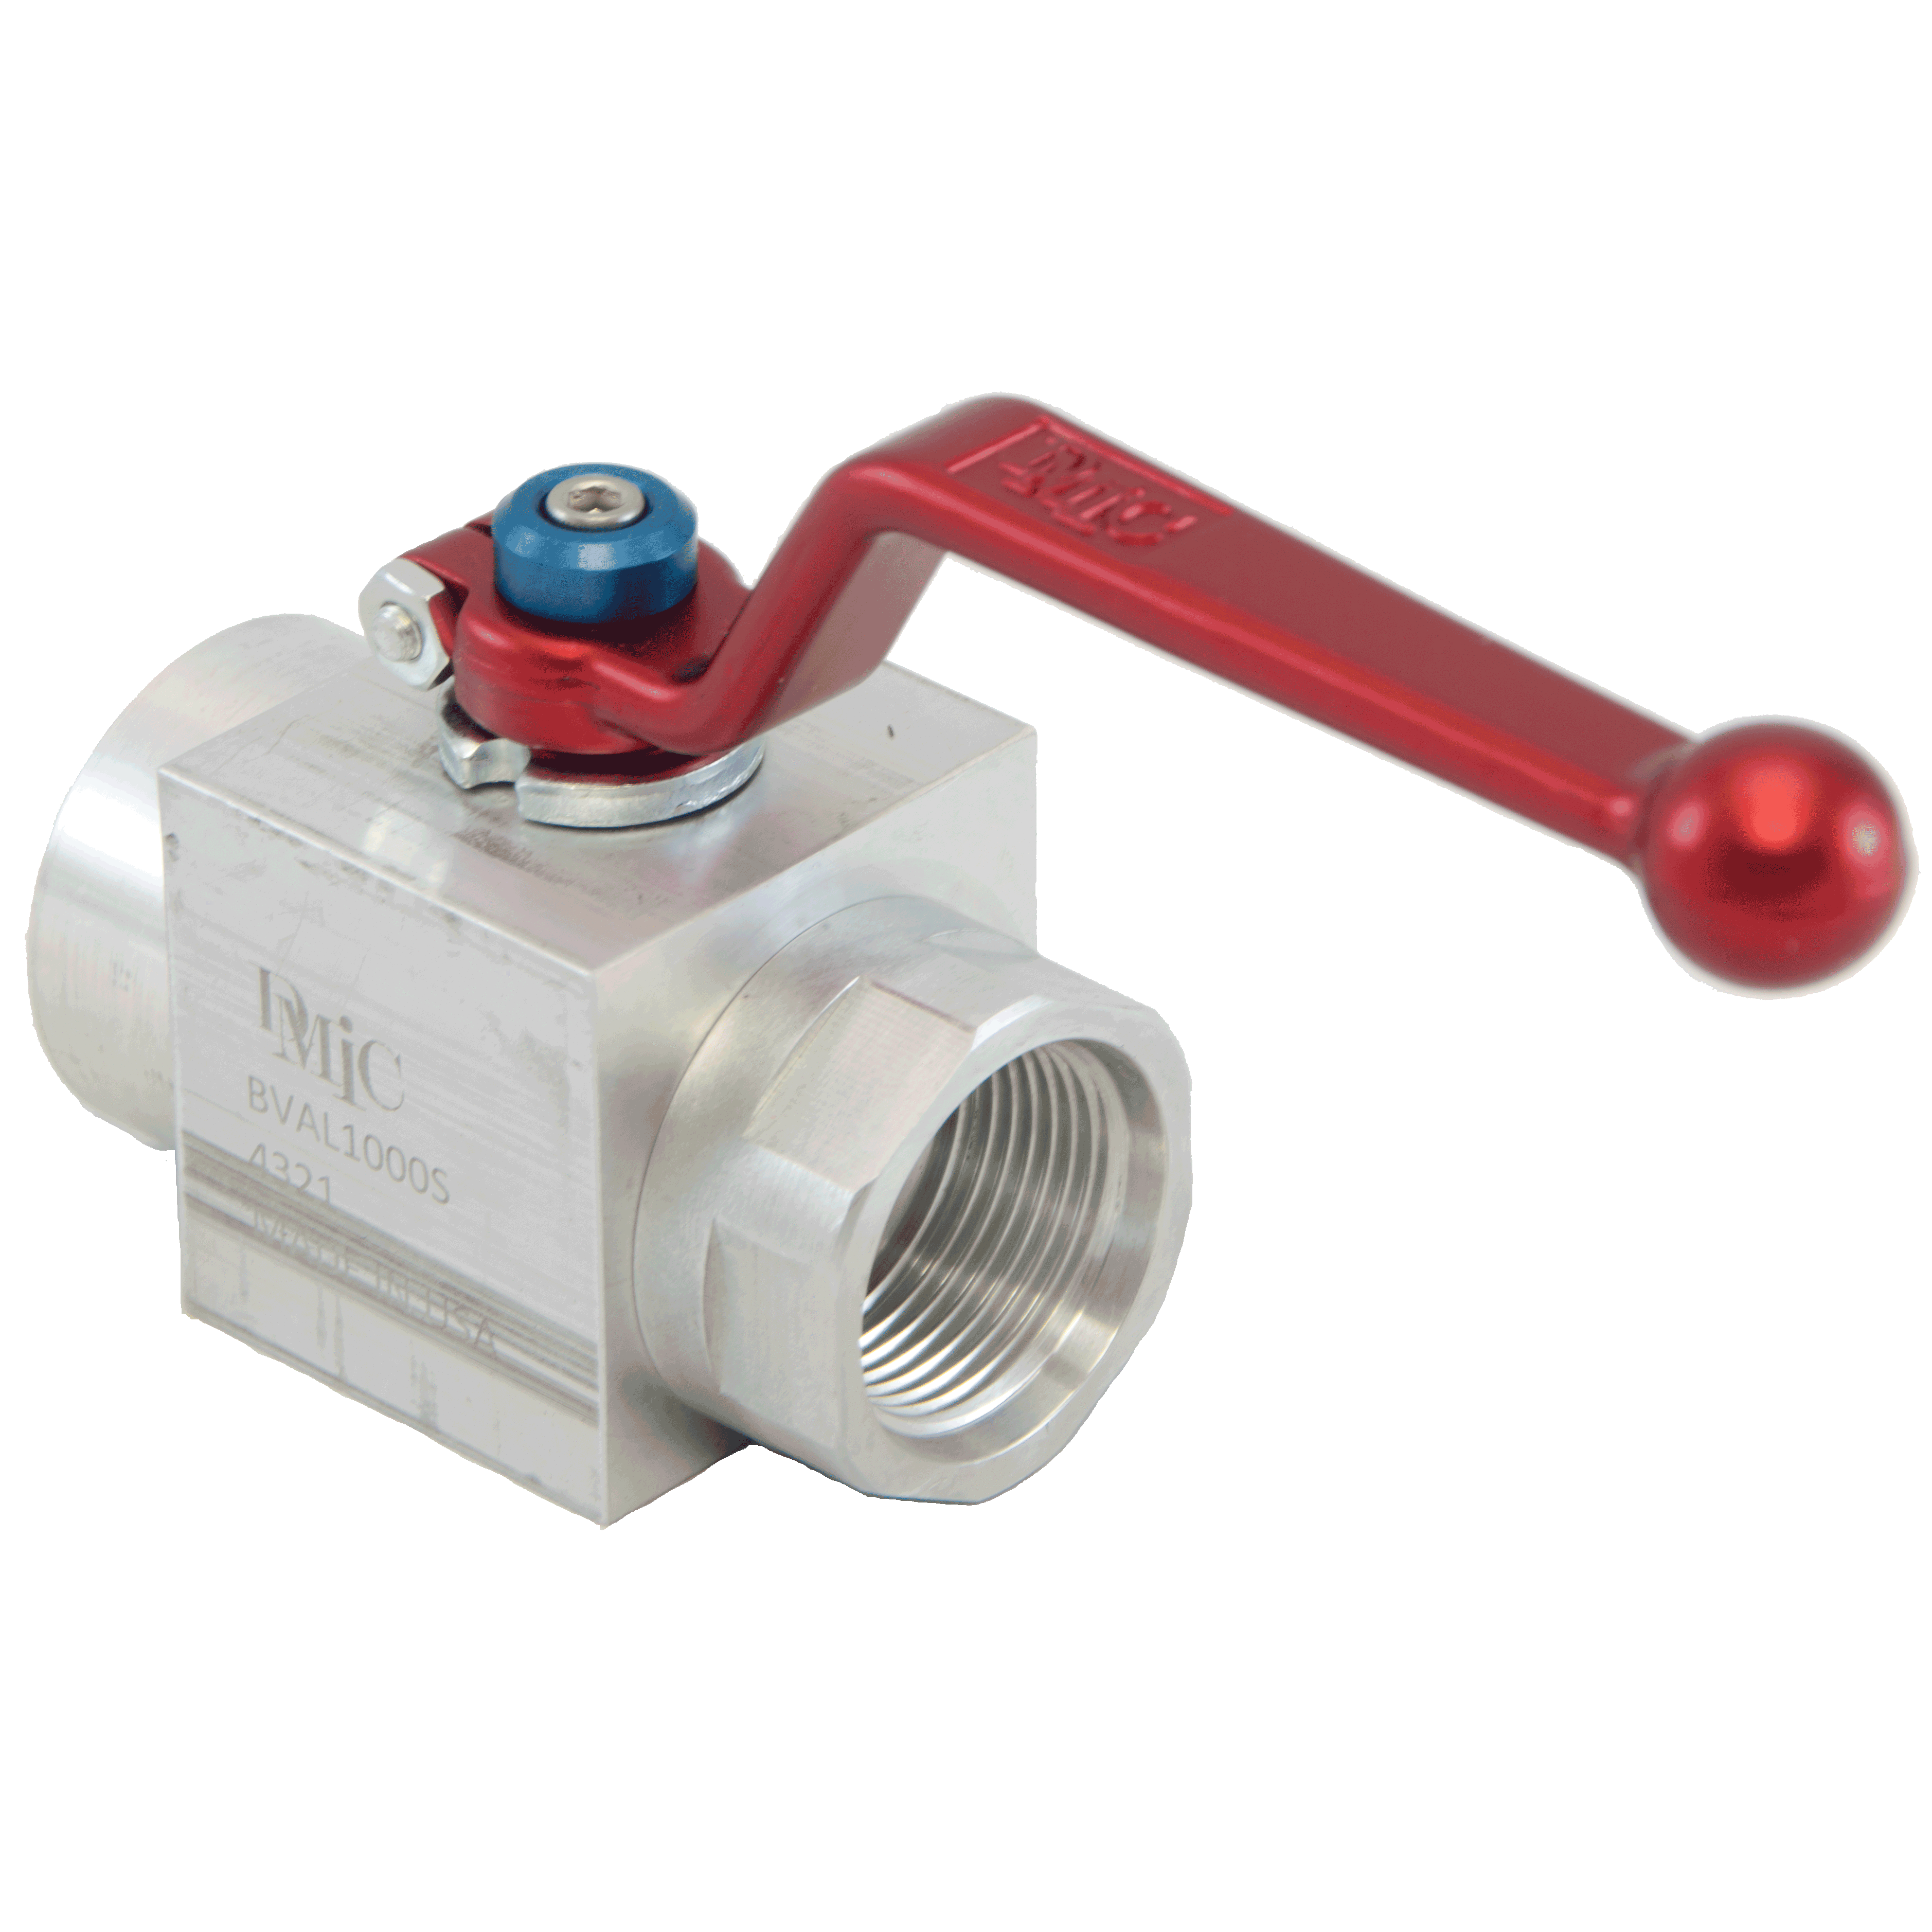 BVAL-0250S-4321 : DMIC Suction Ball Valve, #4 SAE (1/4), Aluminum, 600psi, Two-Way